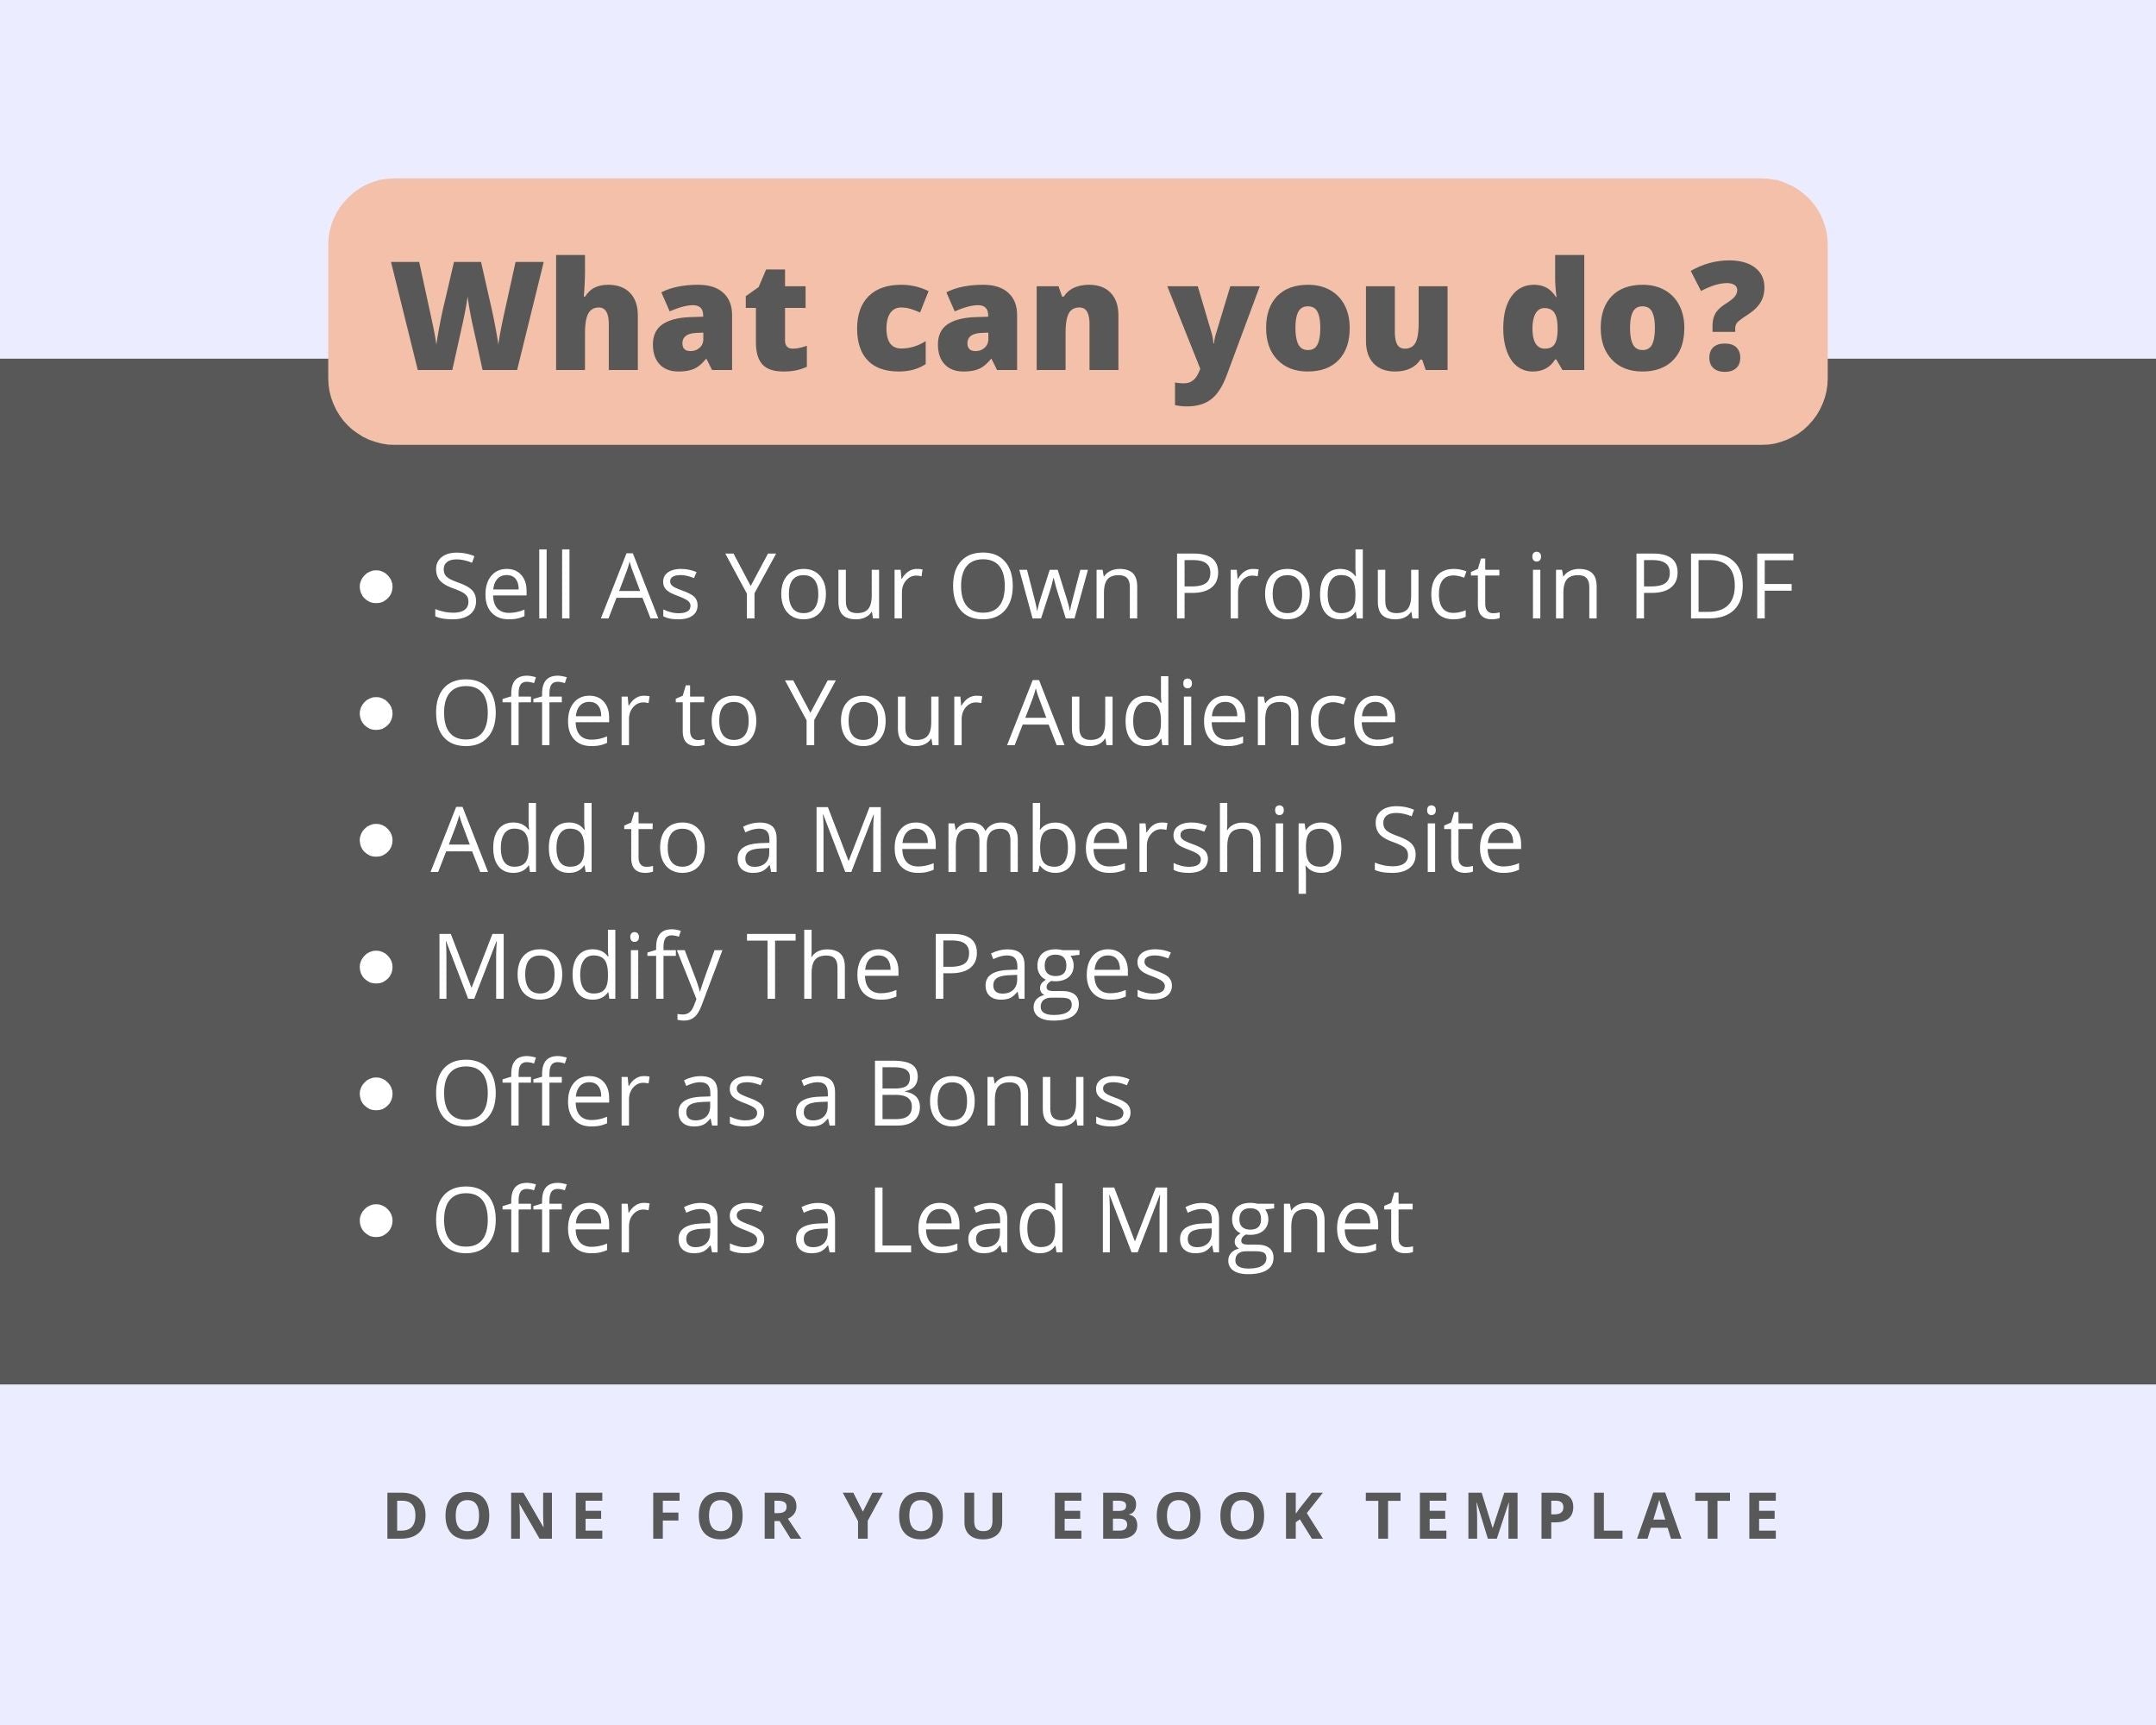 Editable Simple Productivity Ebook | Done-for-You Ebook in Canva | Rebrandable and Resizable Canva Template